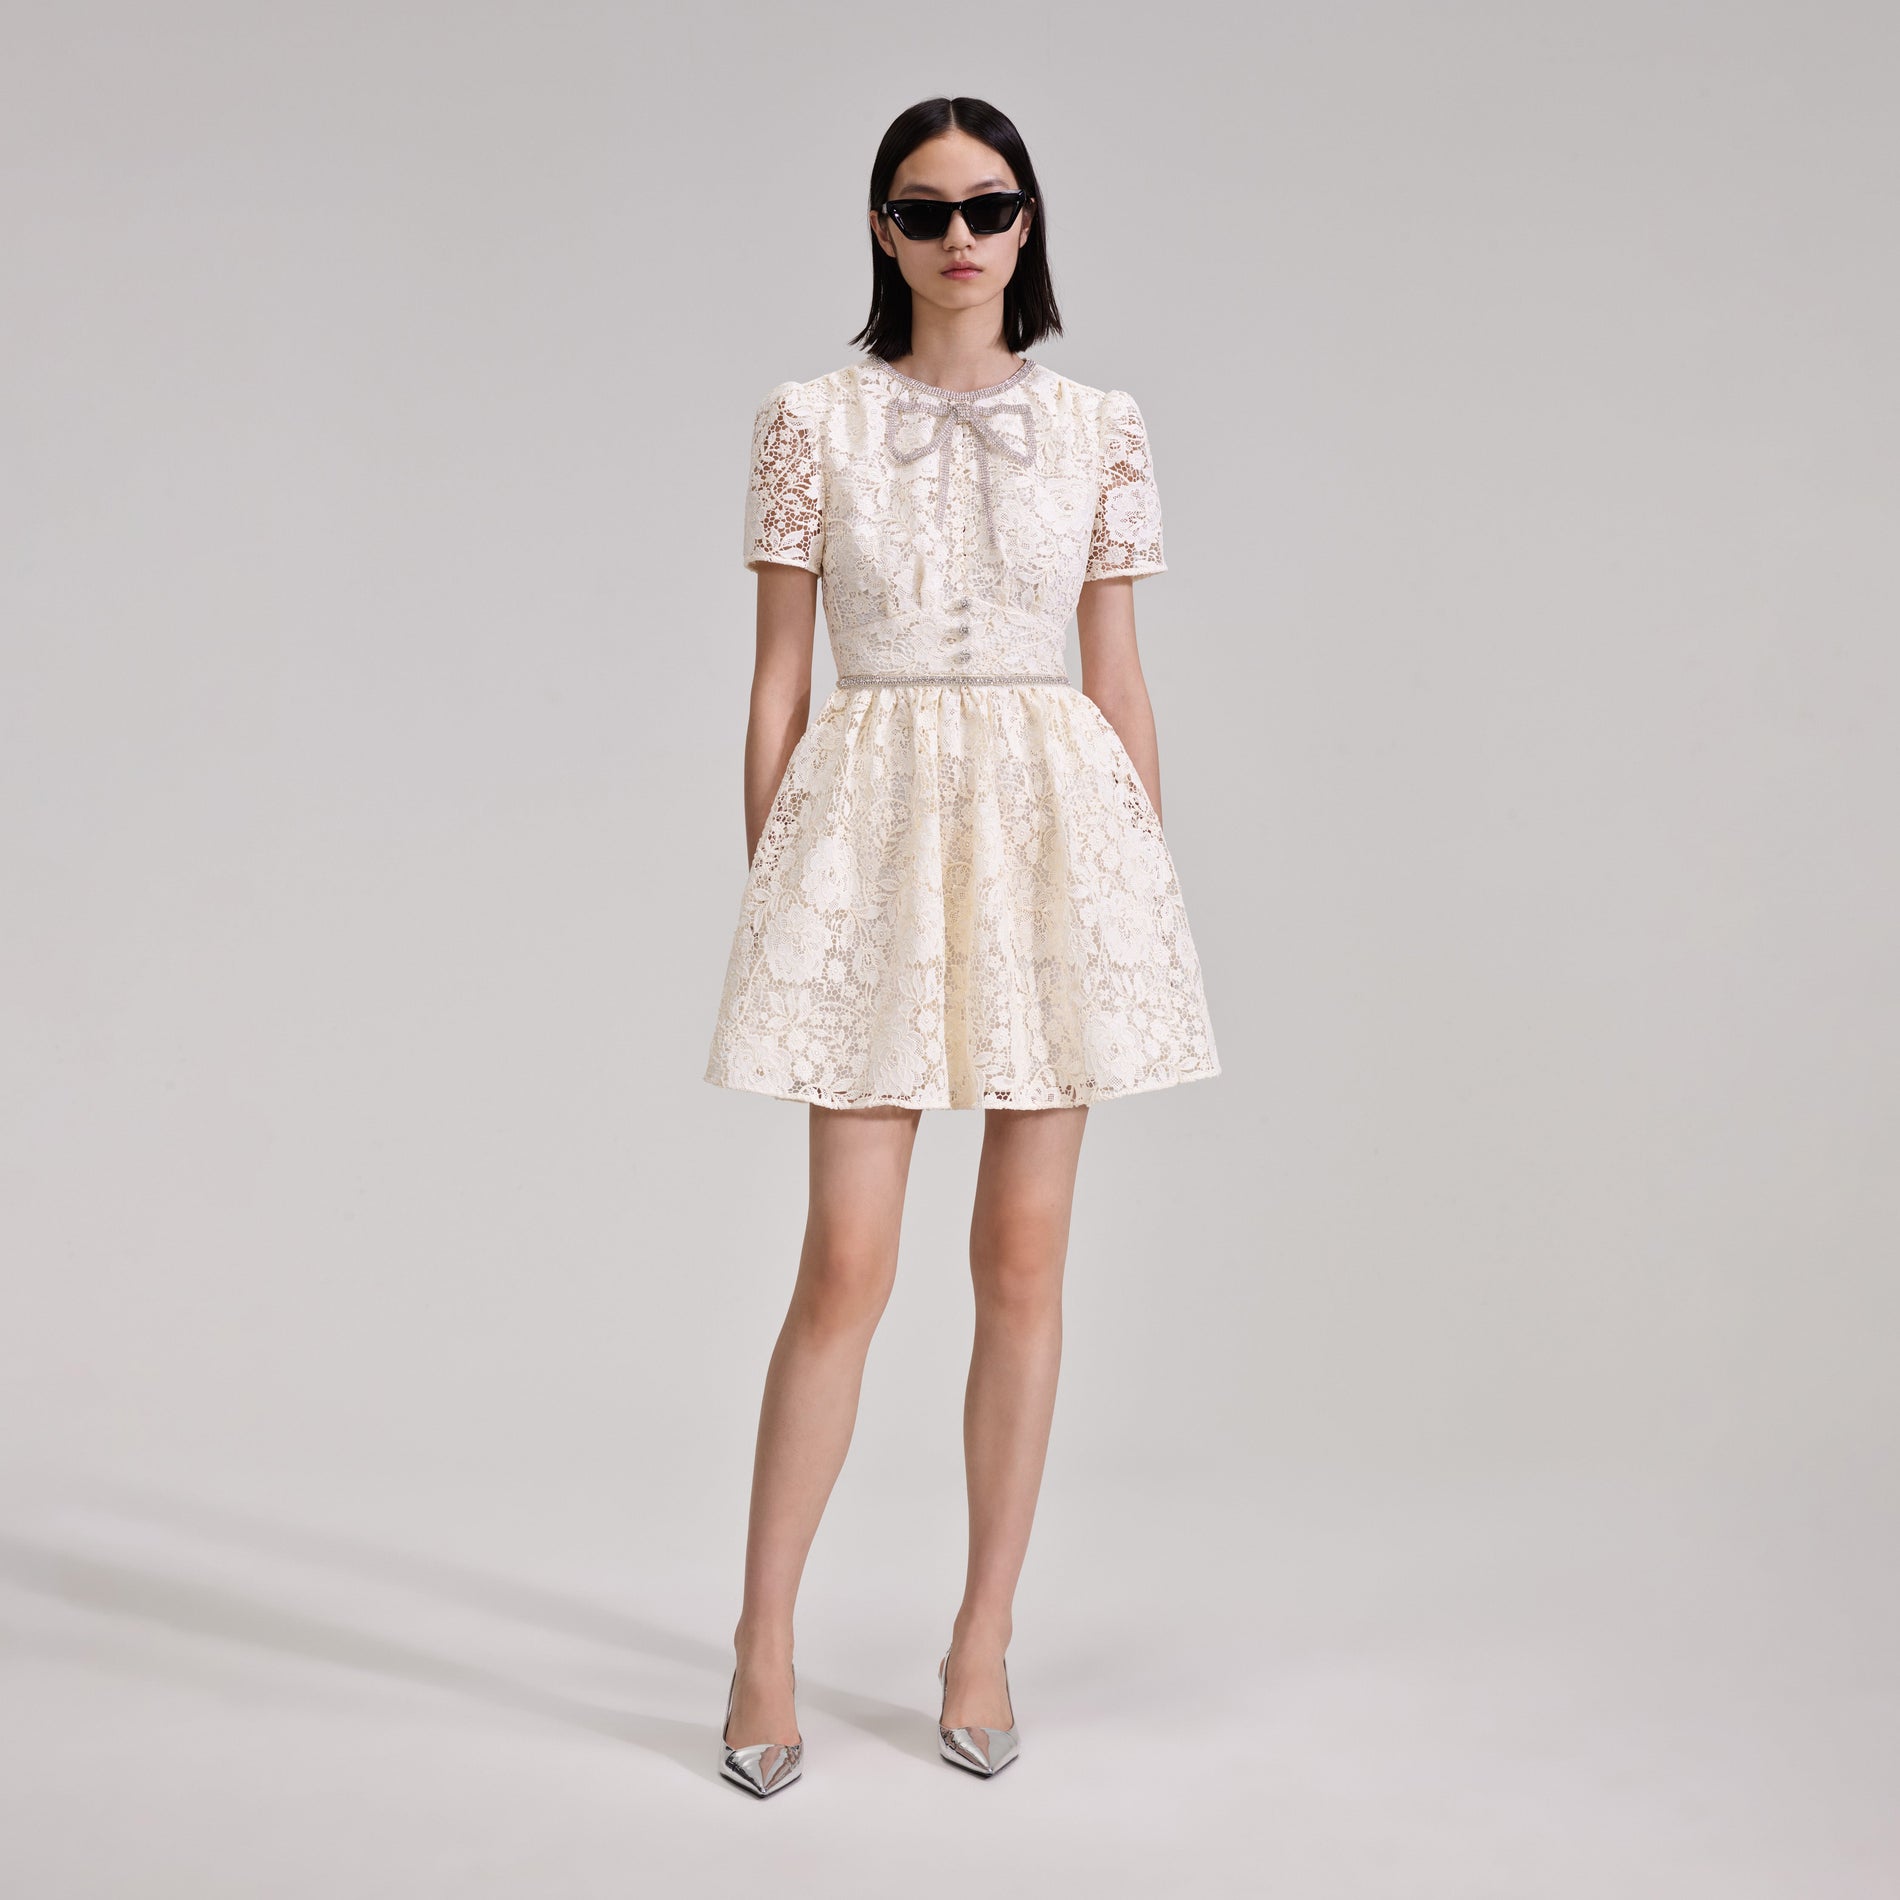 A woman wearing the Cream Cord Lace Bow Mini Dress